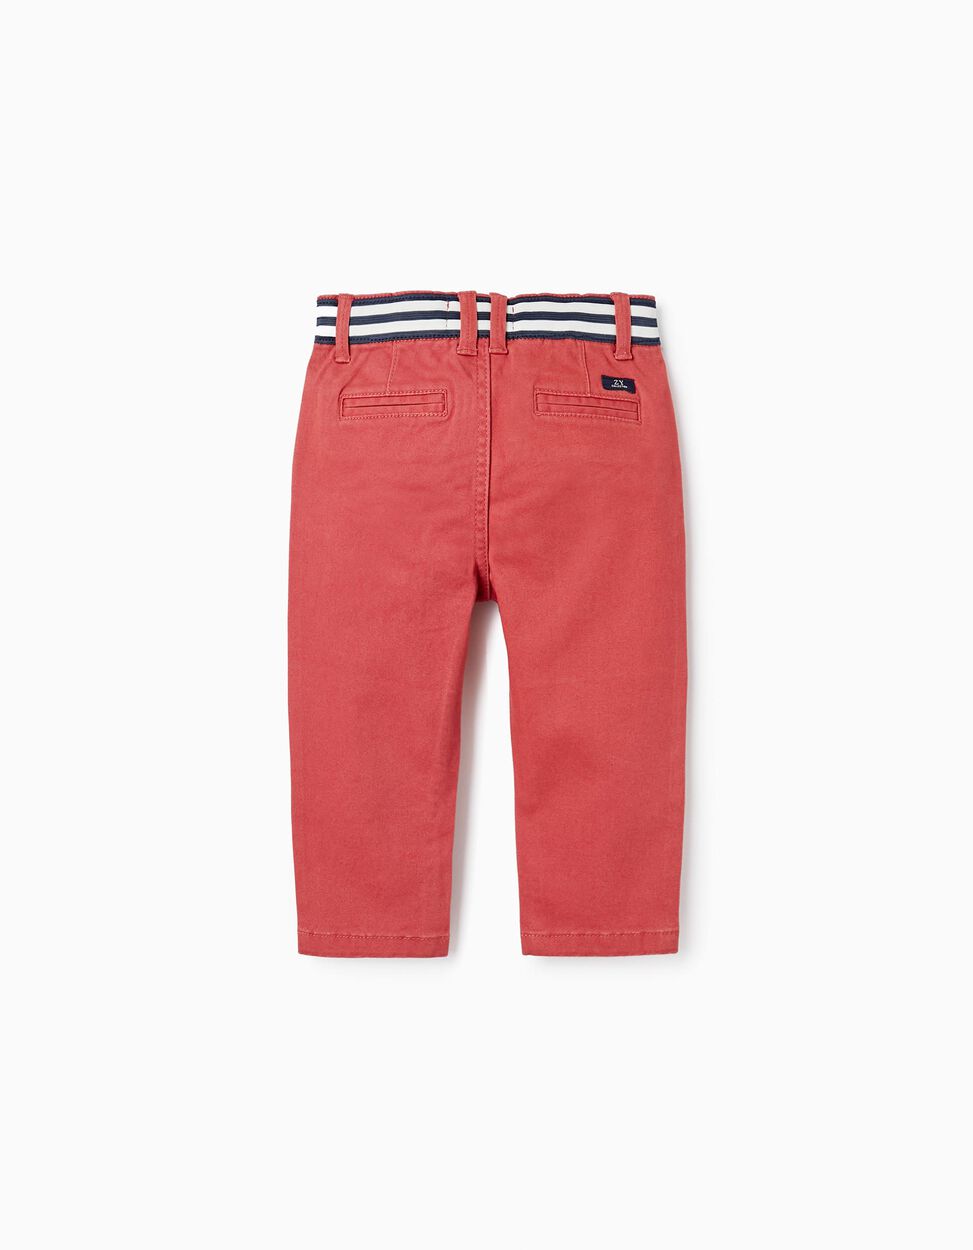 Buy Online Twill Chino Trousers for Baby Boy, Brick Red